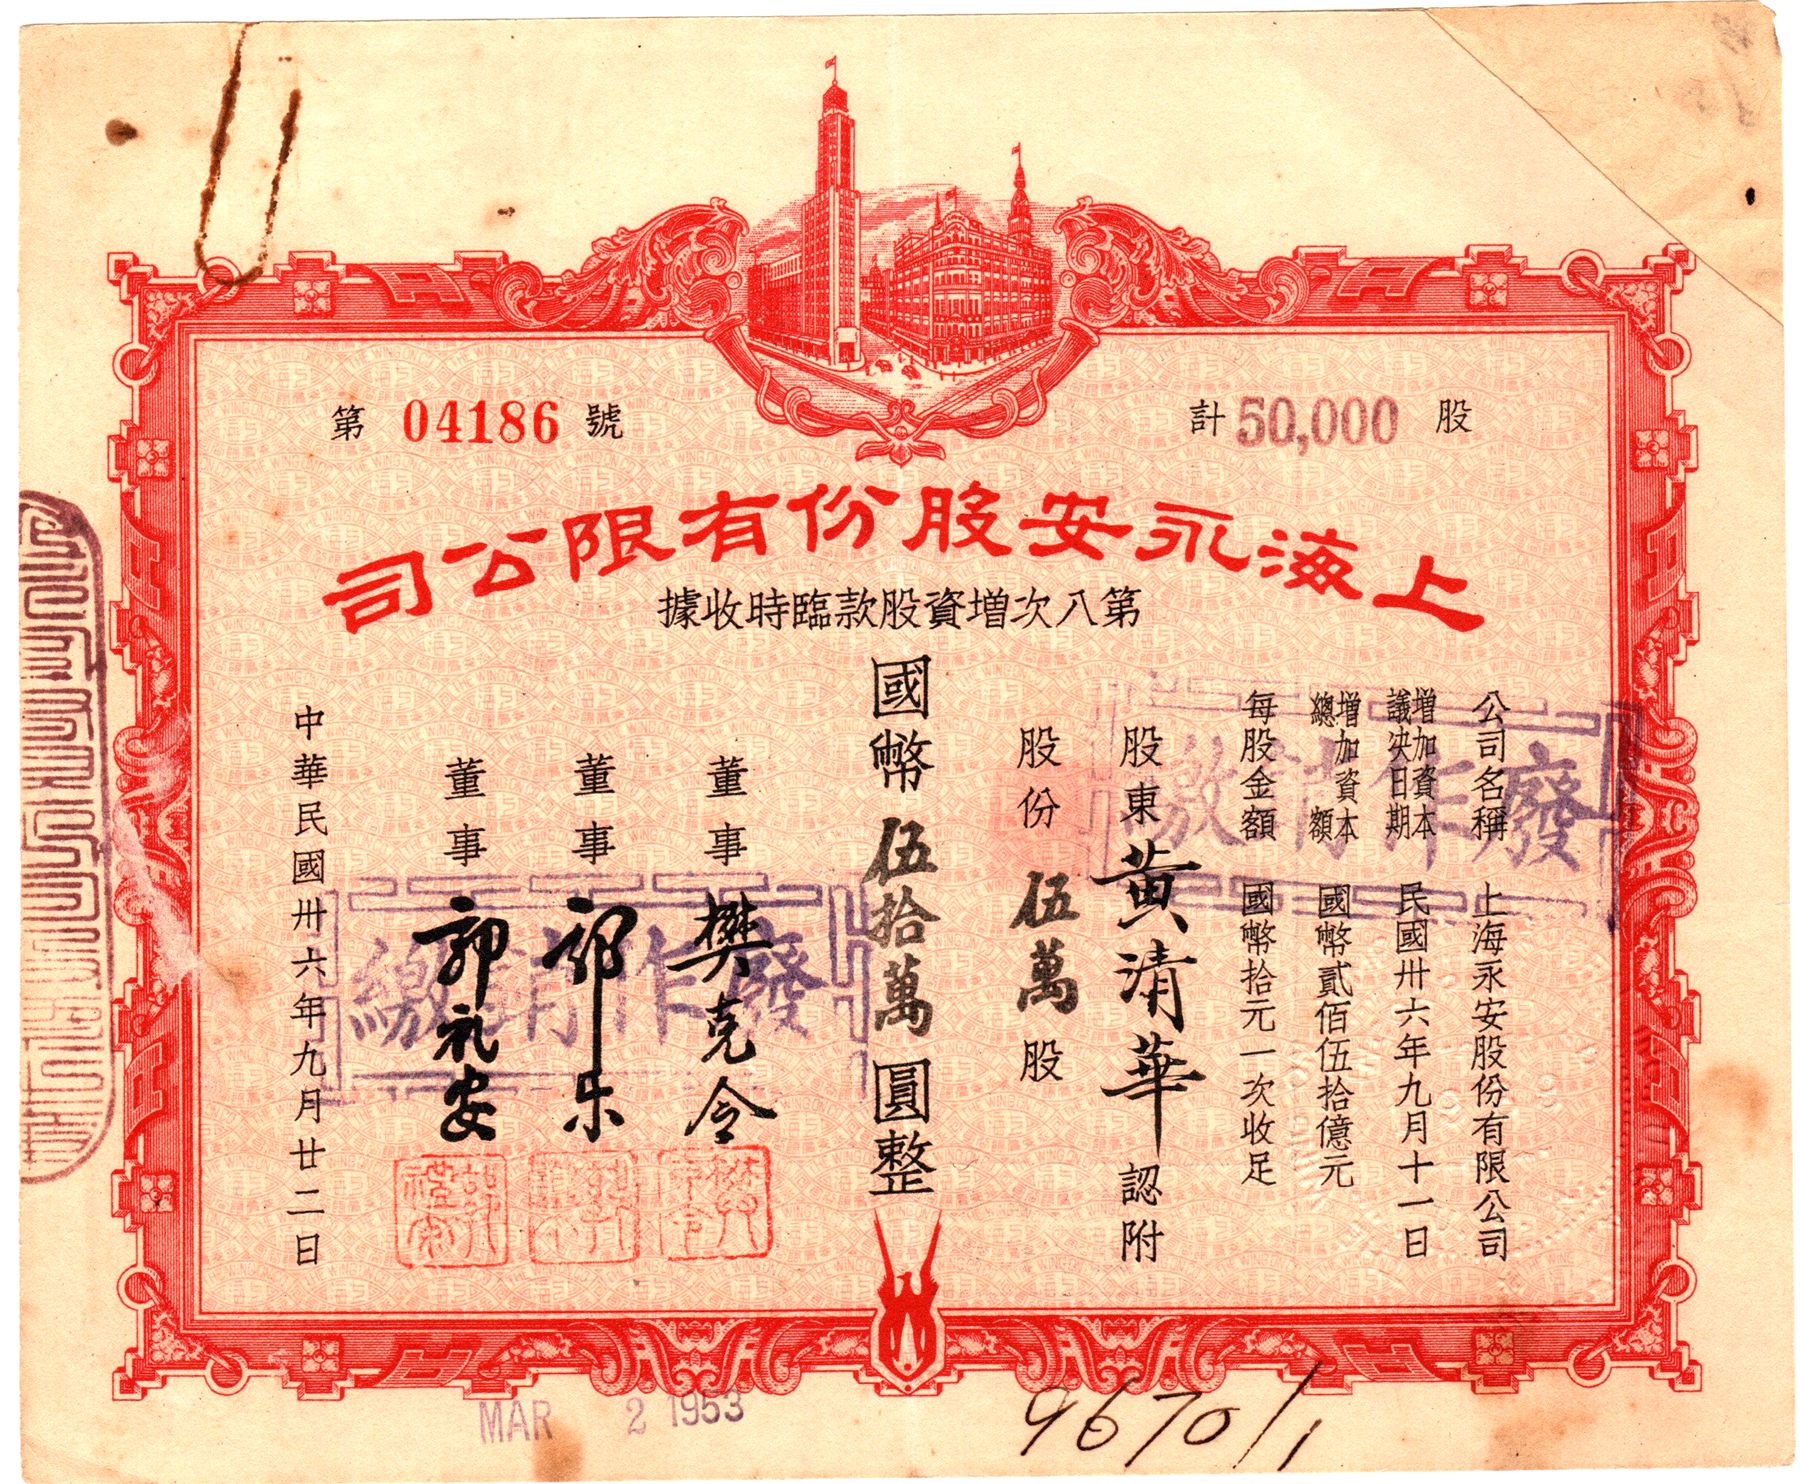 S1156, Wing-On Company Federal Inc, Stock Certificate 1946, 50,000 Shares, Shanghai